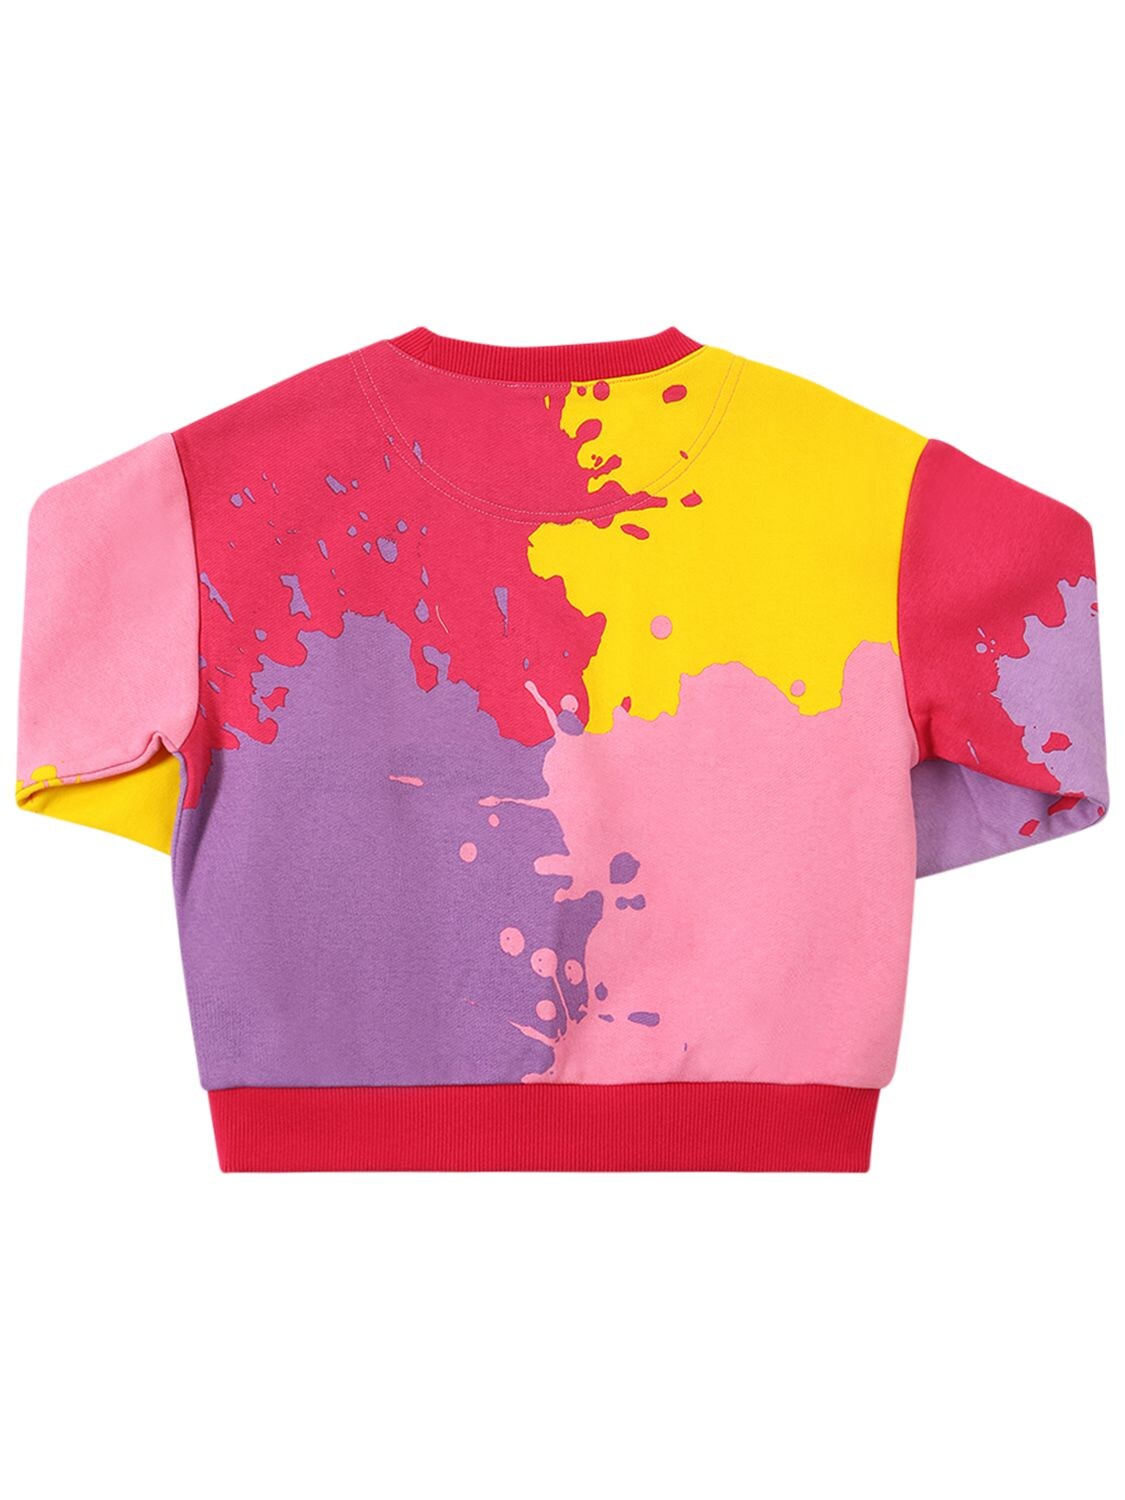 Shop Marc Jacobs All Over Print Cotton Jersey Sweatshirt In Multicolor